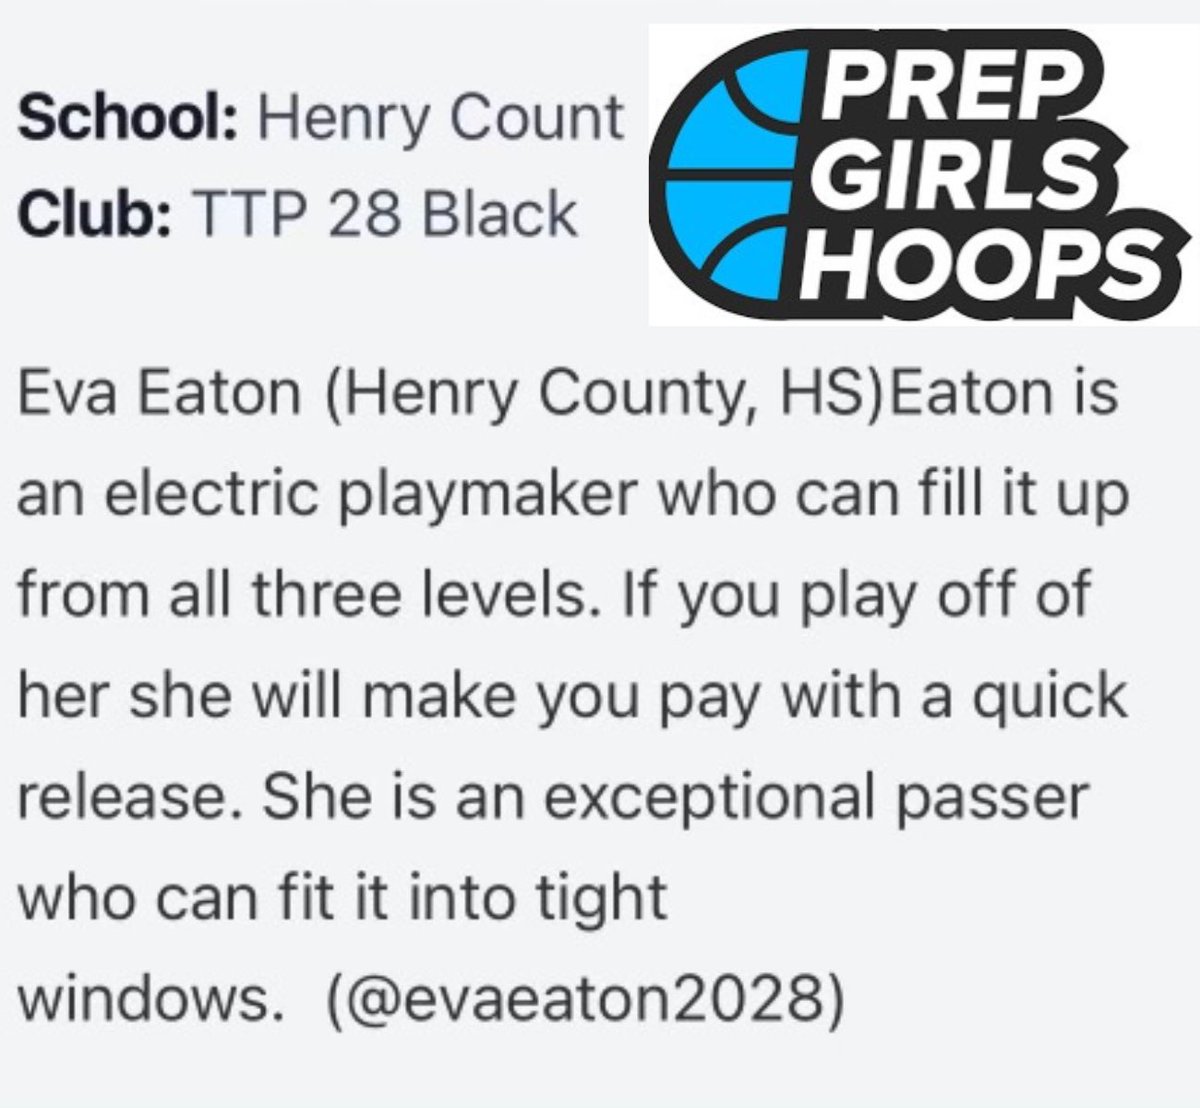 Thank you @CoachDycus at @PrepGirlsHoops for the write up! I look forward to a great season with these girls. Can’t wait for Pennsylvania next weekend! @tnteampride2028